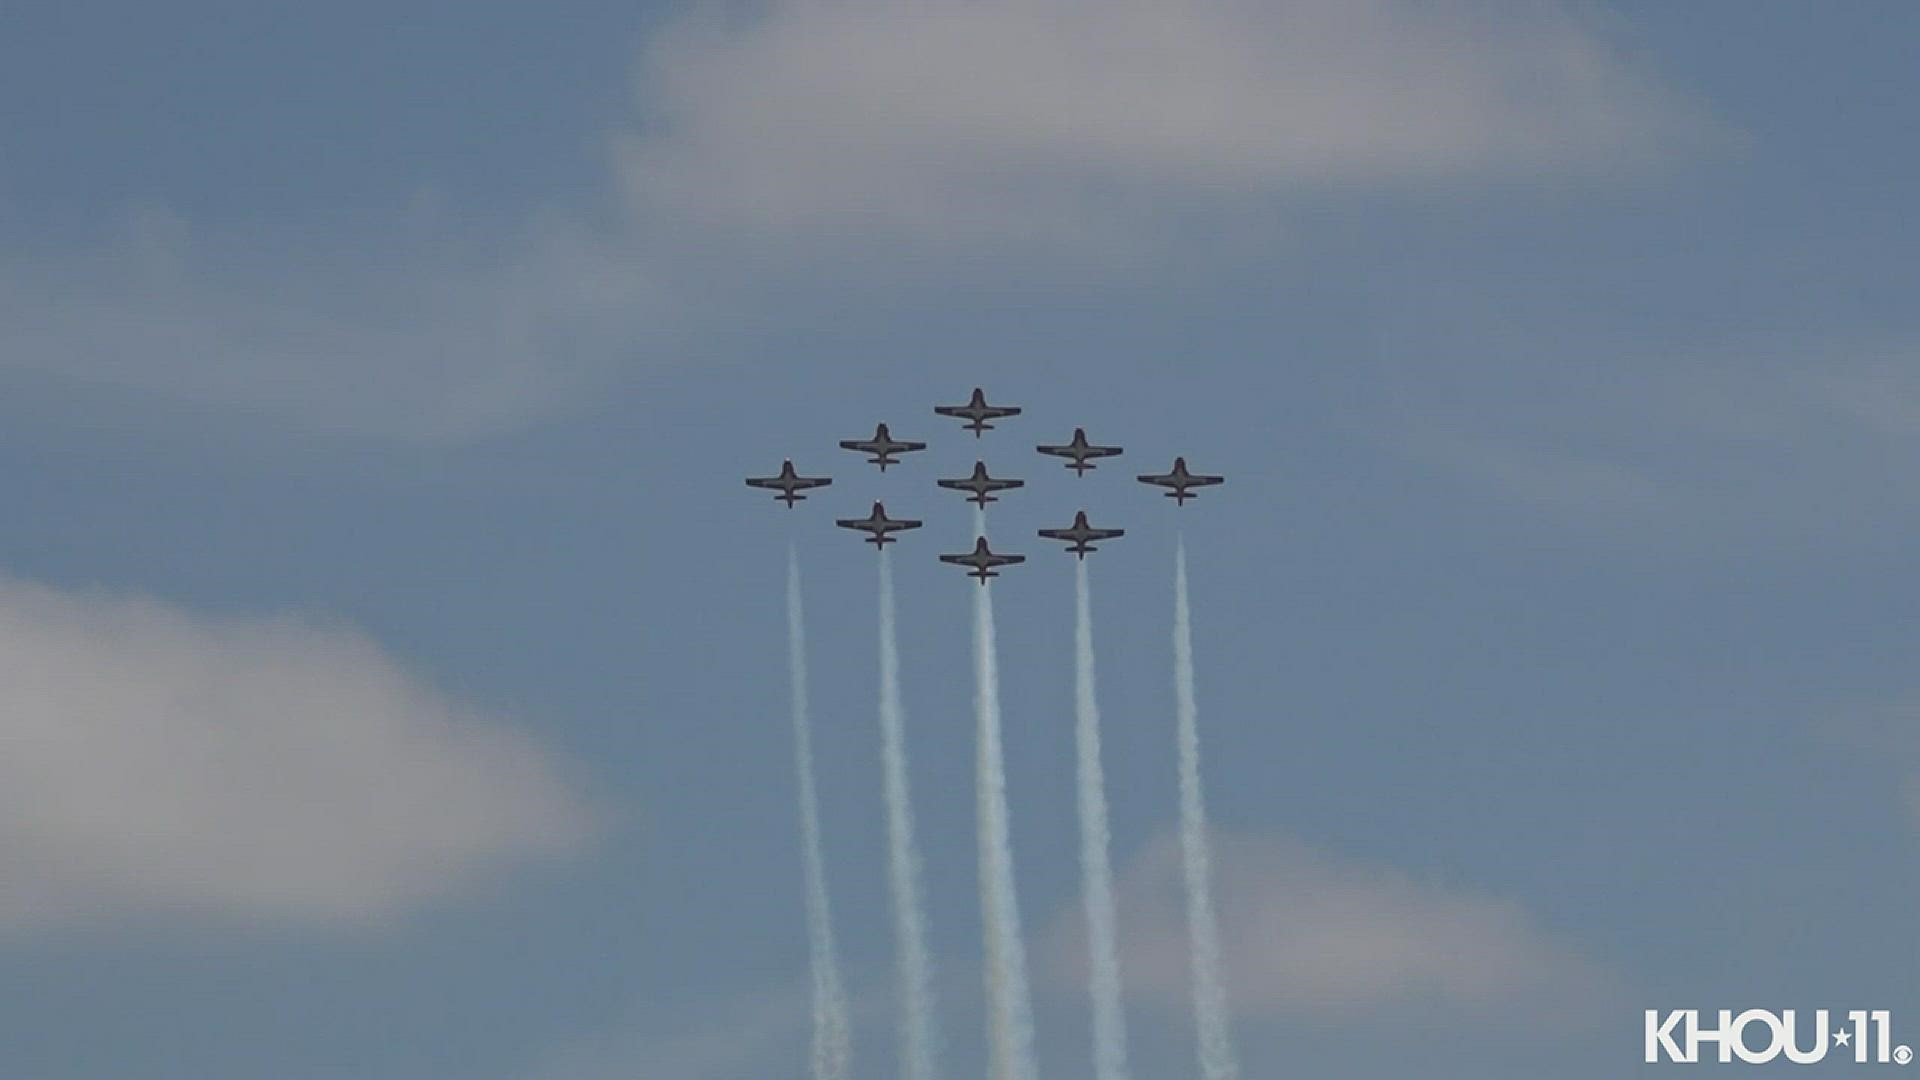 The roar of planes could be heard over southeast Houston on Saturday.